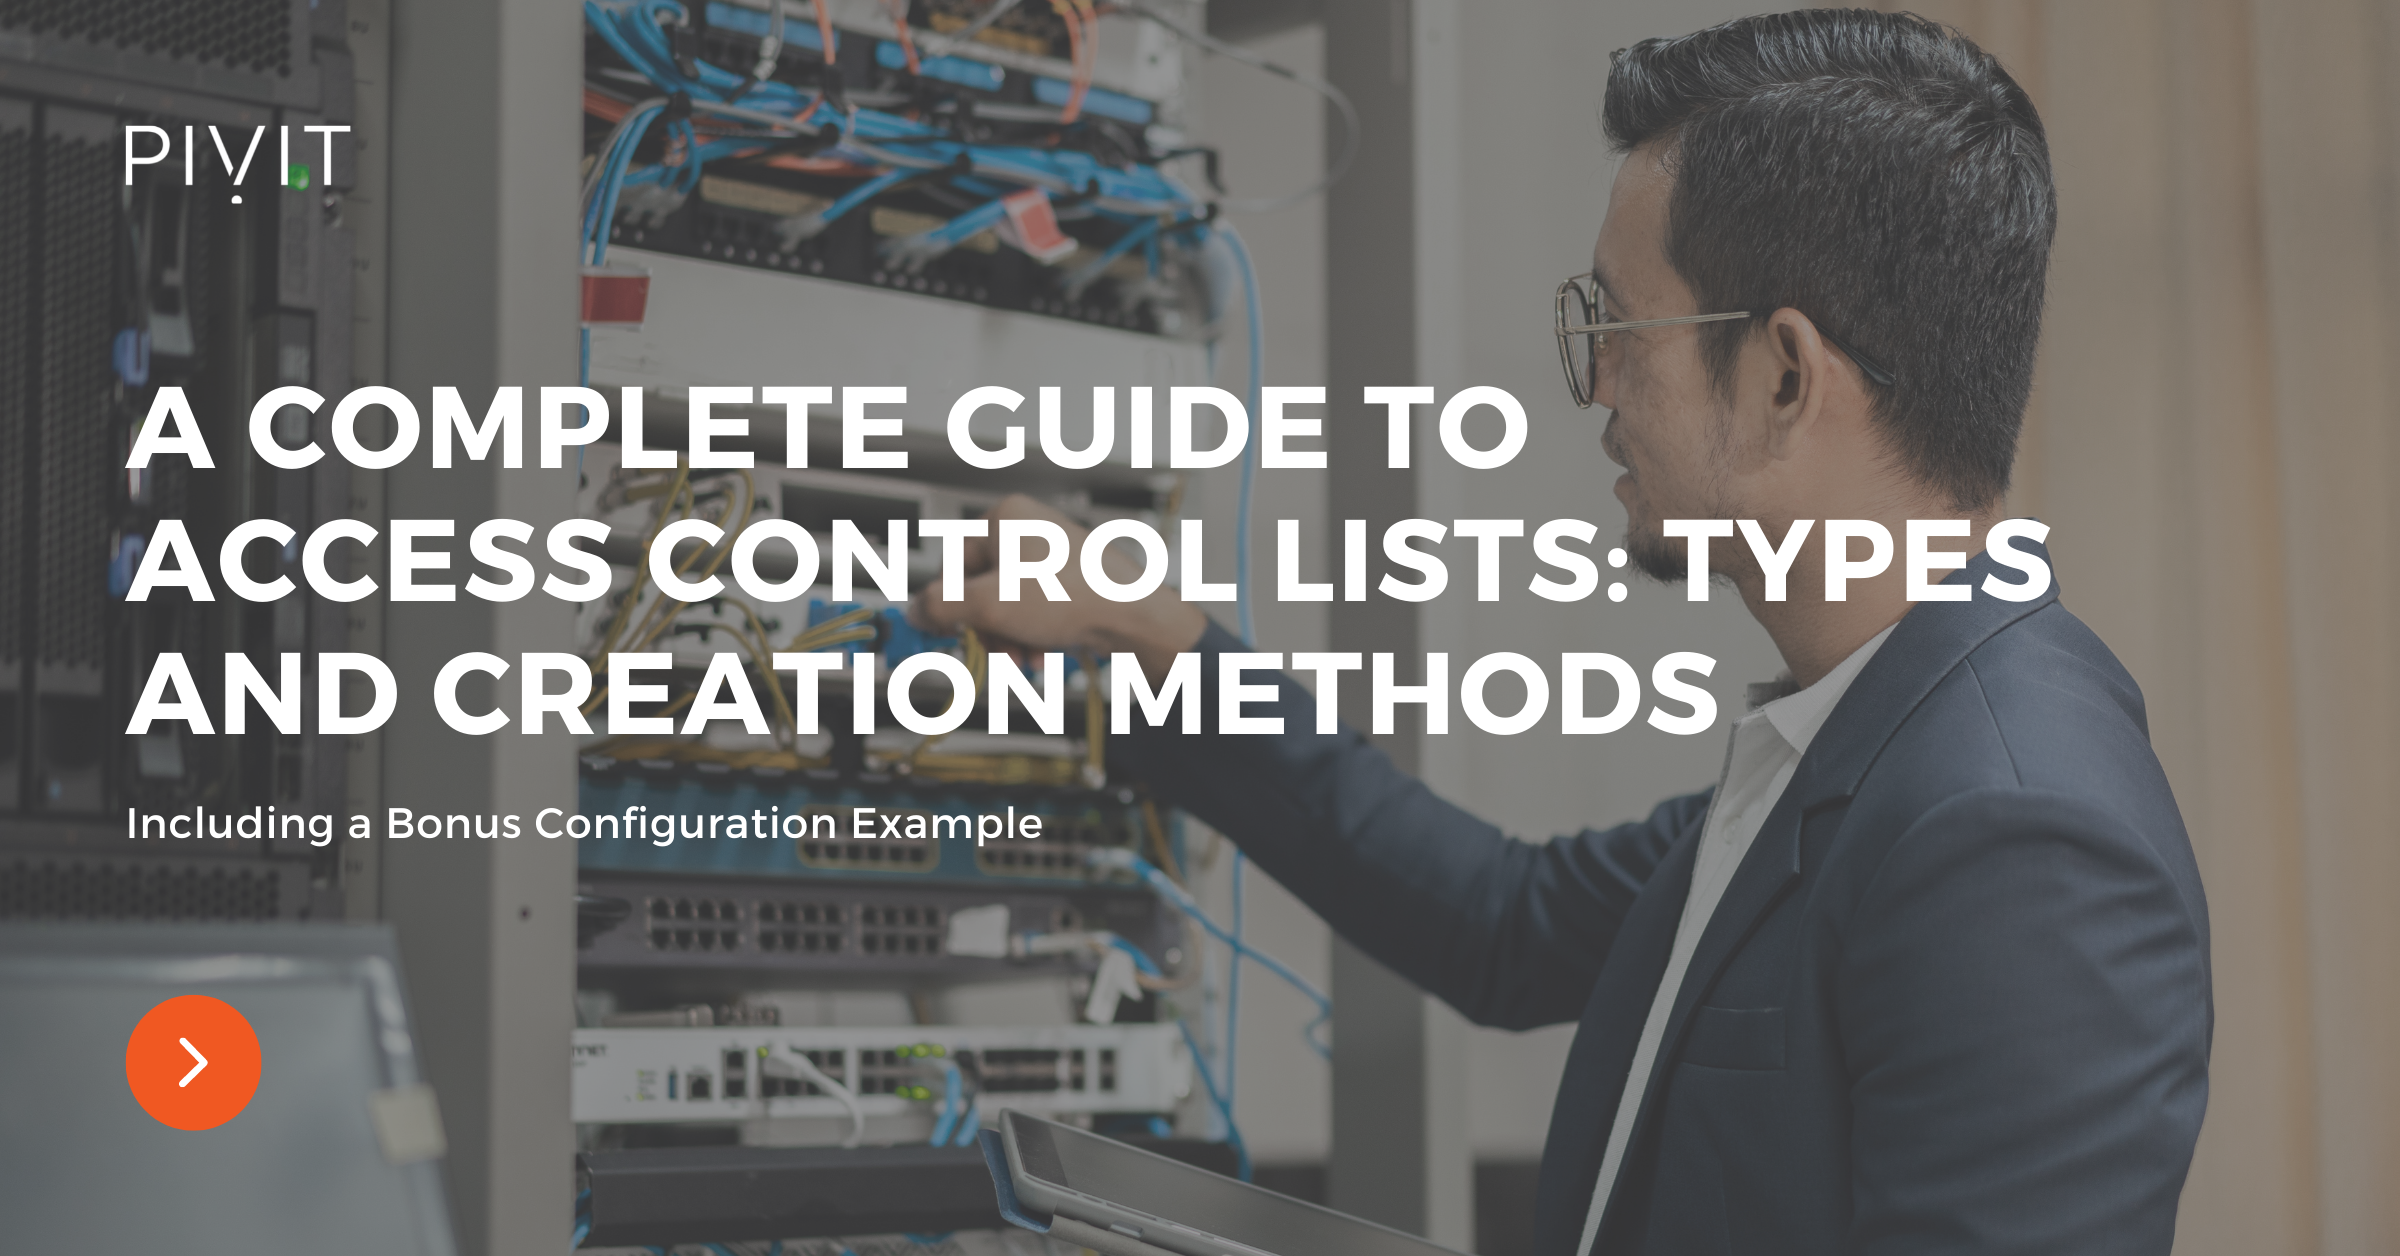 A Complete Guide to Access Control Lists: Types and Creation Methods